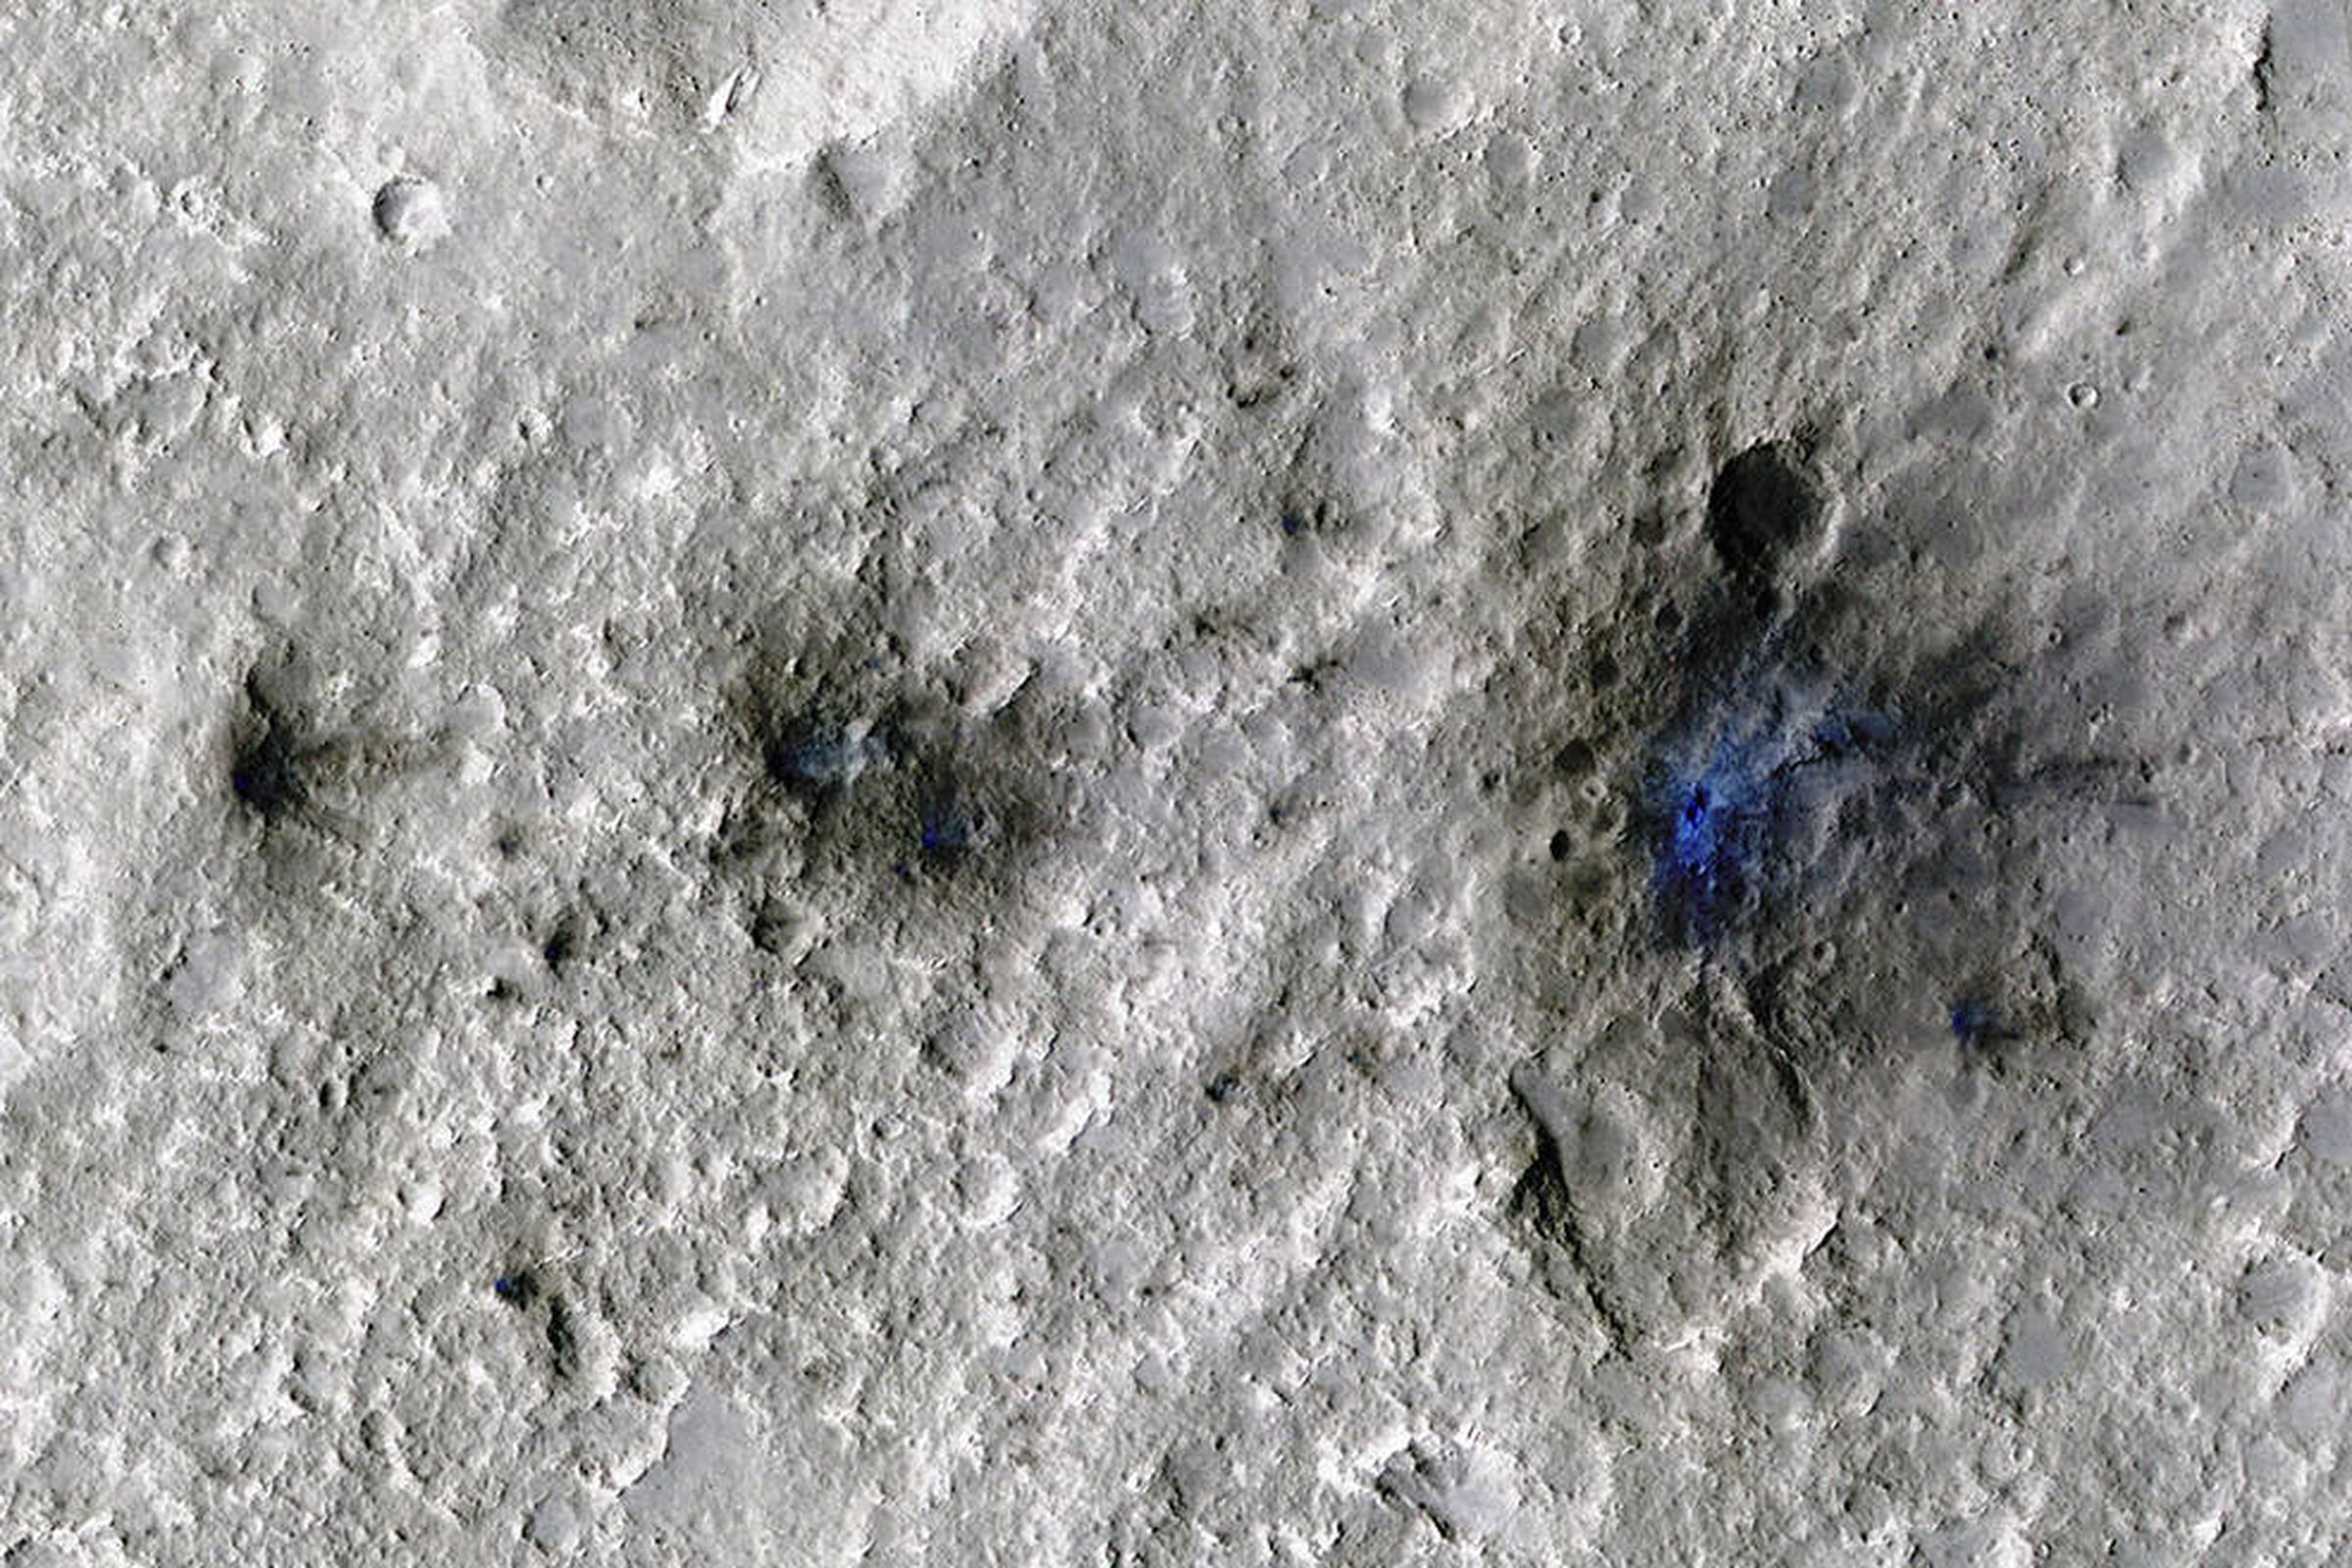 Three dark black craters on a pocked light grey surface. The smallest is on the left and the largest is on the right. There are faint traces of bright blue in the center of each.